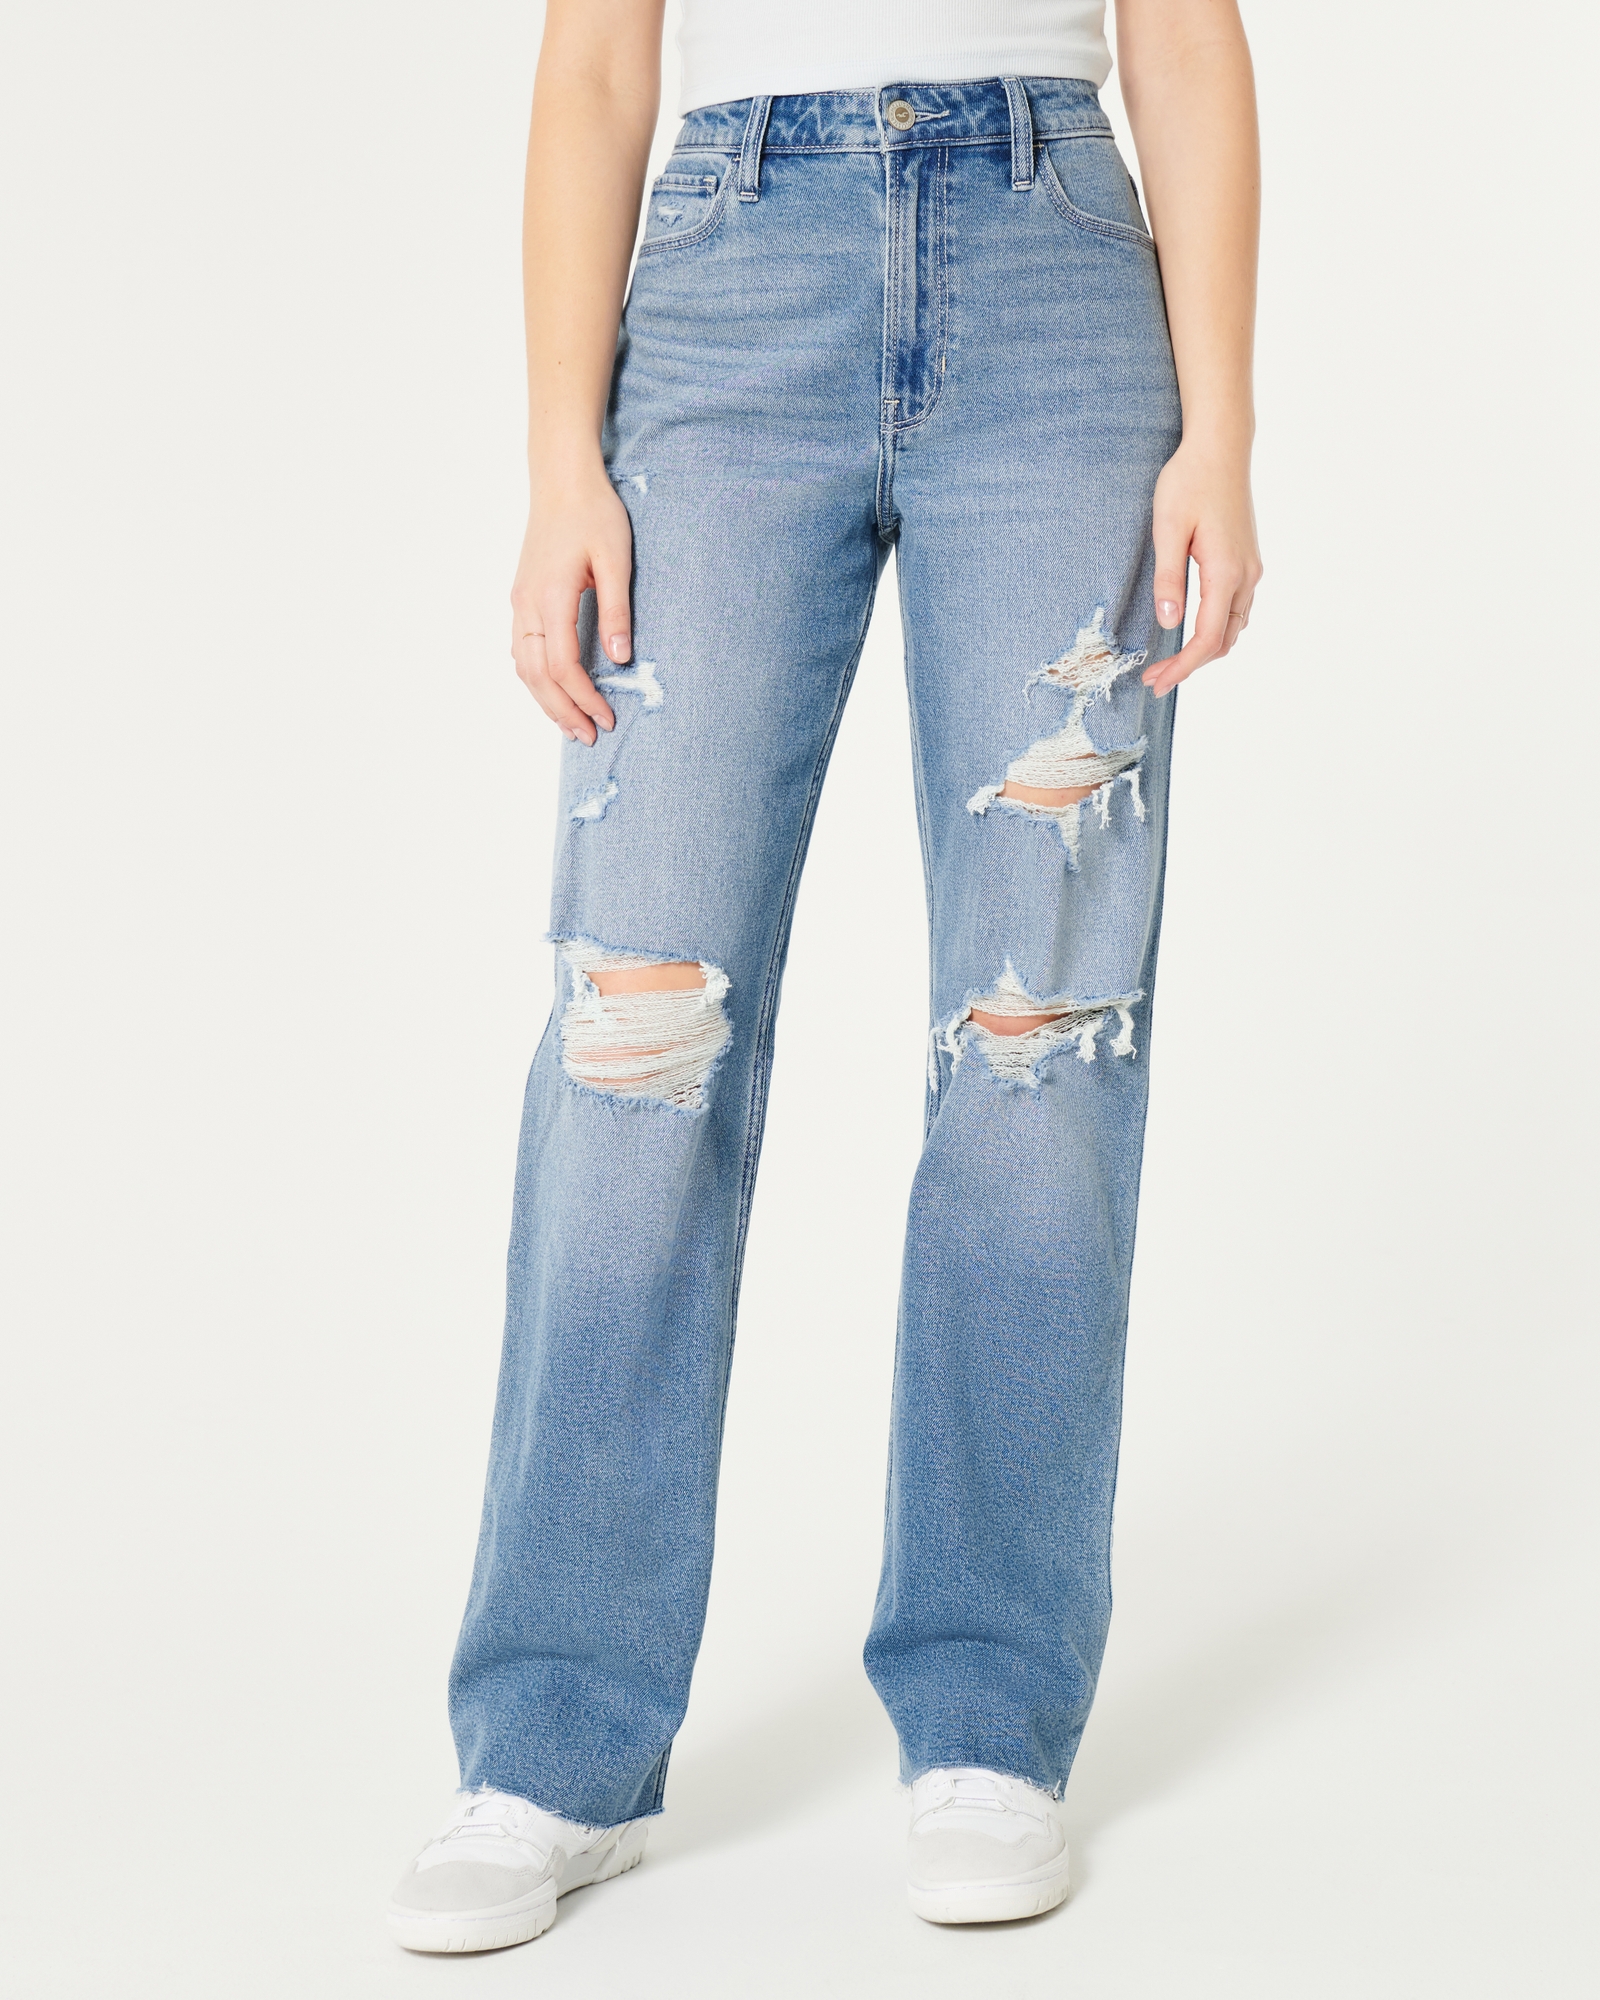 Pacsun Blue Mom Jeans Size 23 Ripped High Waist Rise Relaxed Leg Distressed  Jean